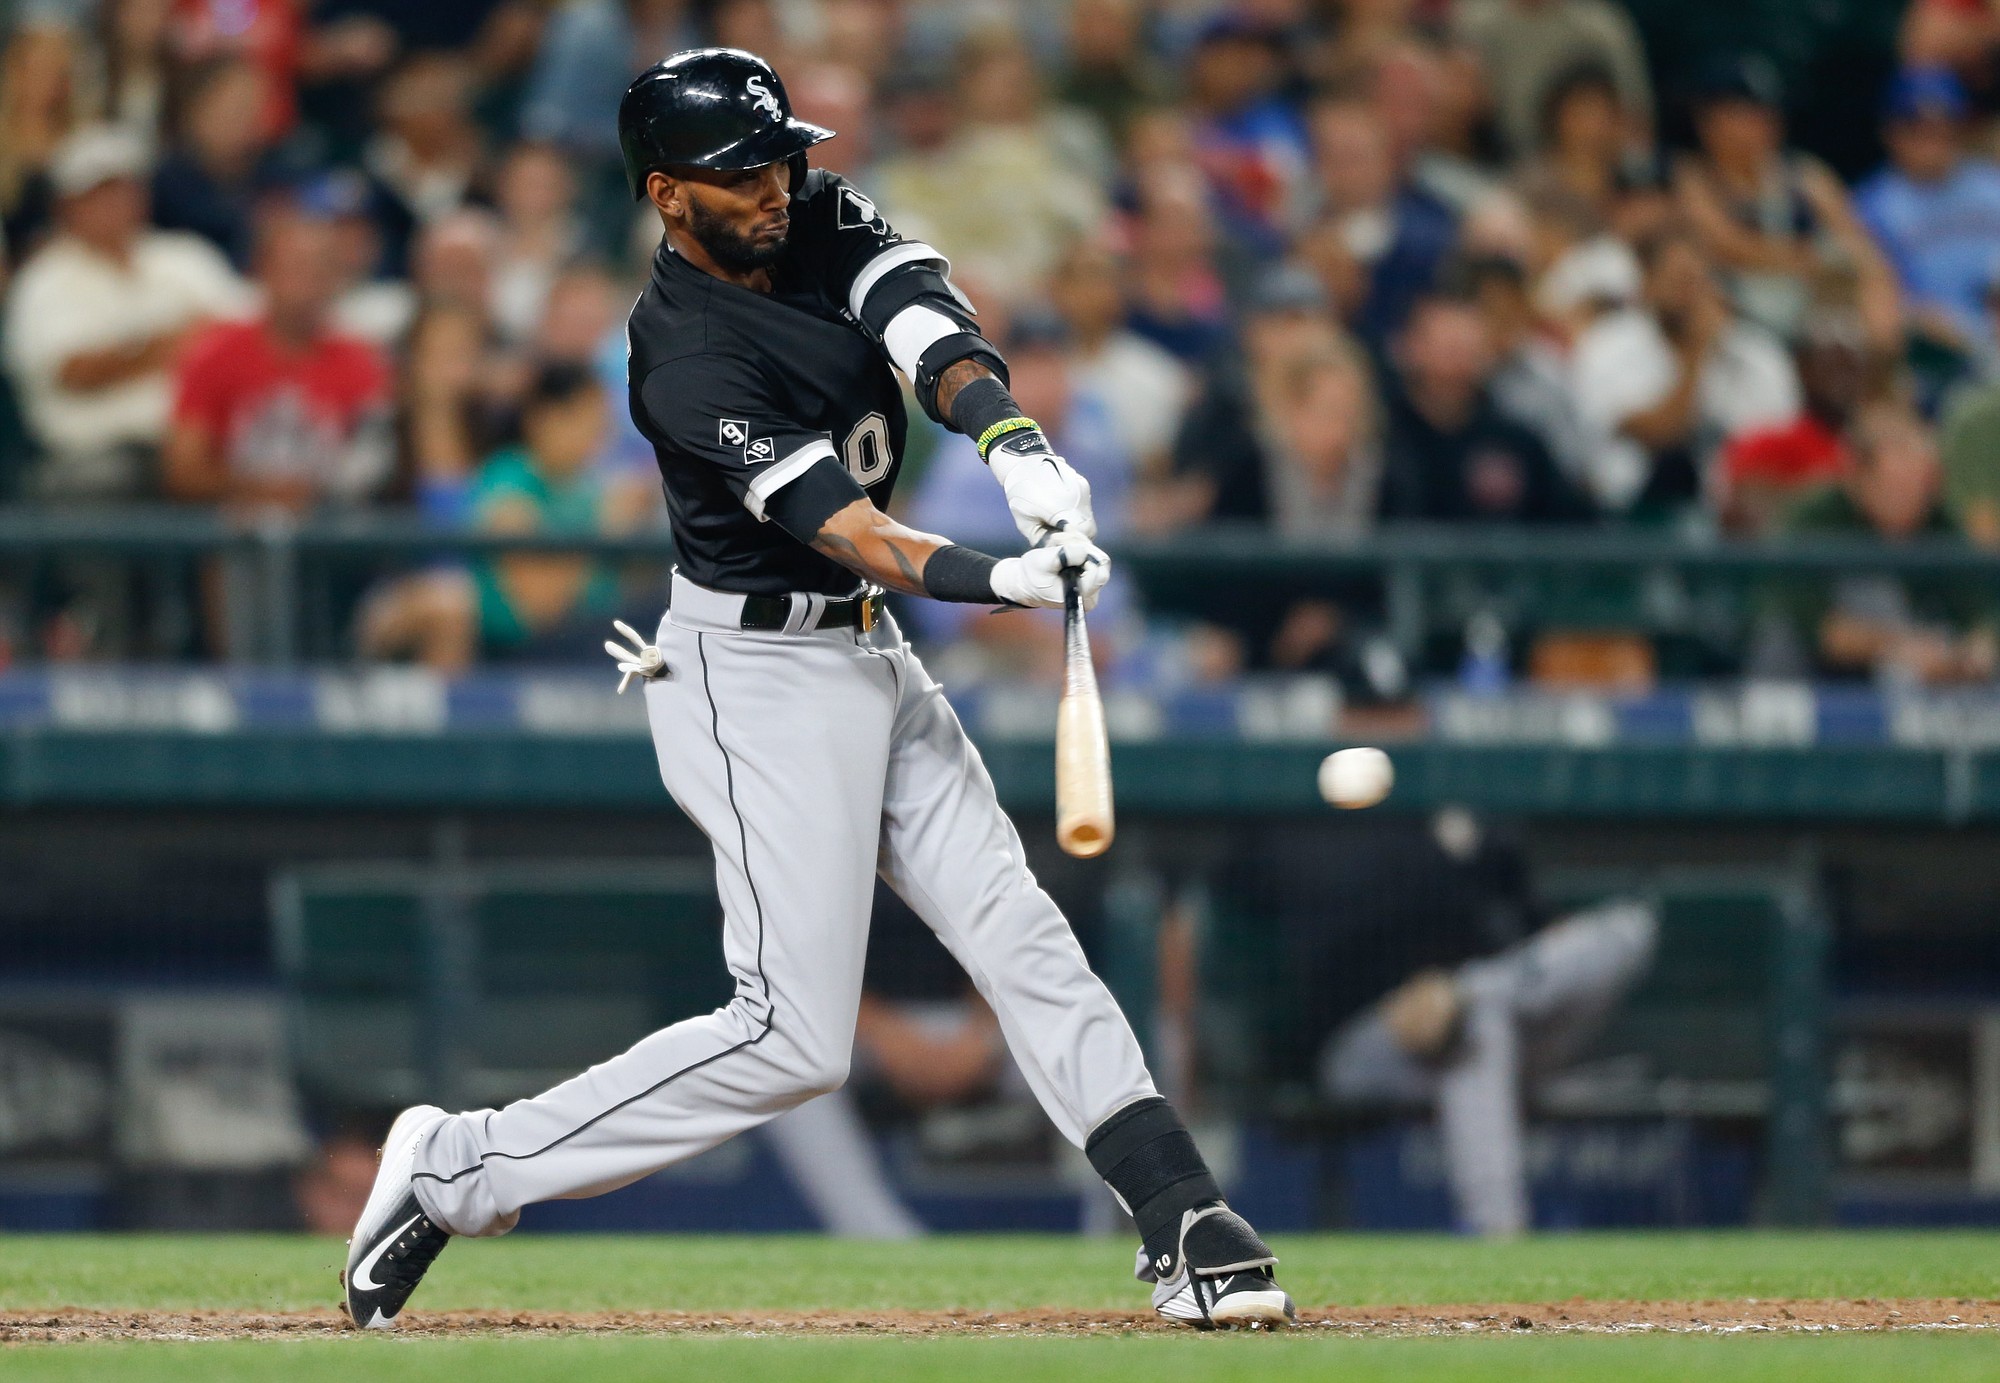 Chicago White Sox's Alexei Ramirez hits an RBI single during the ninth inning in Seattle.